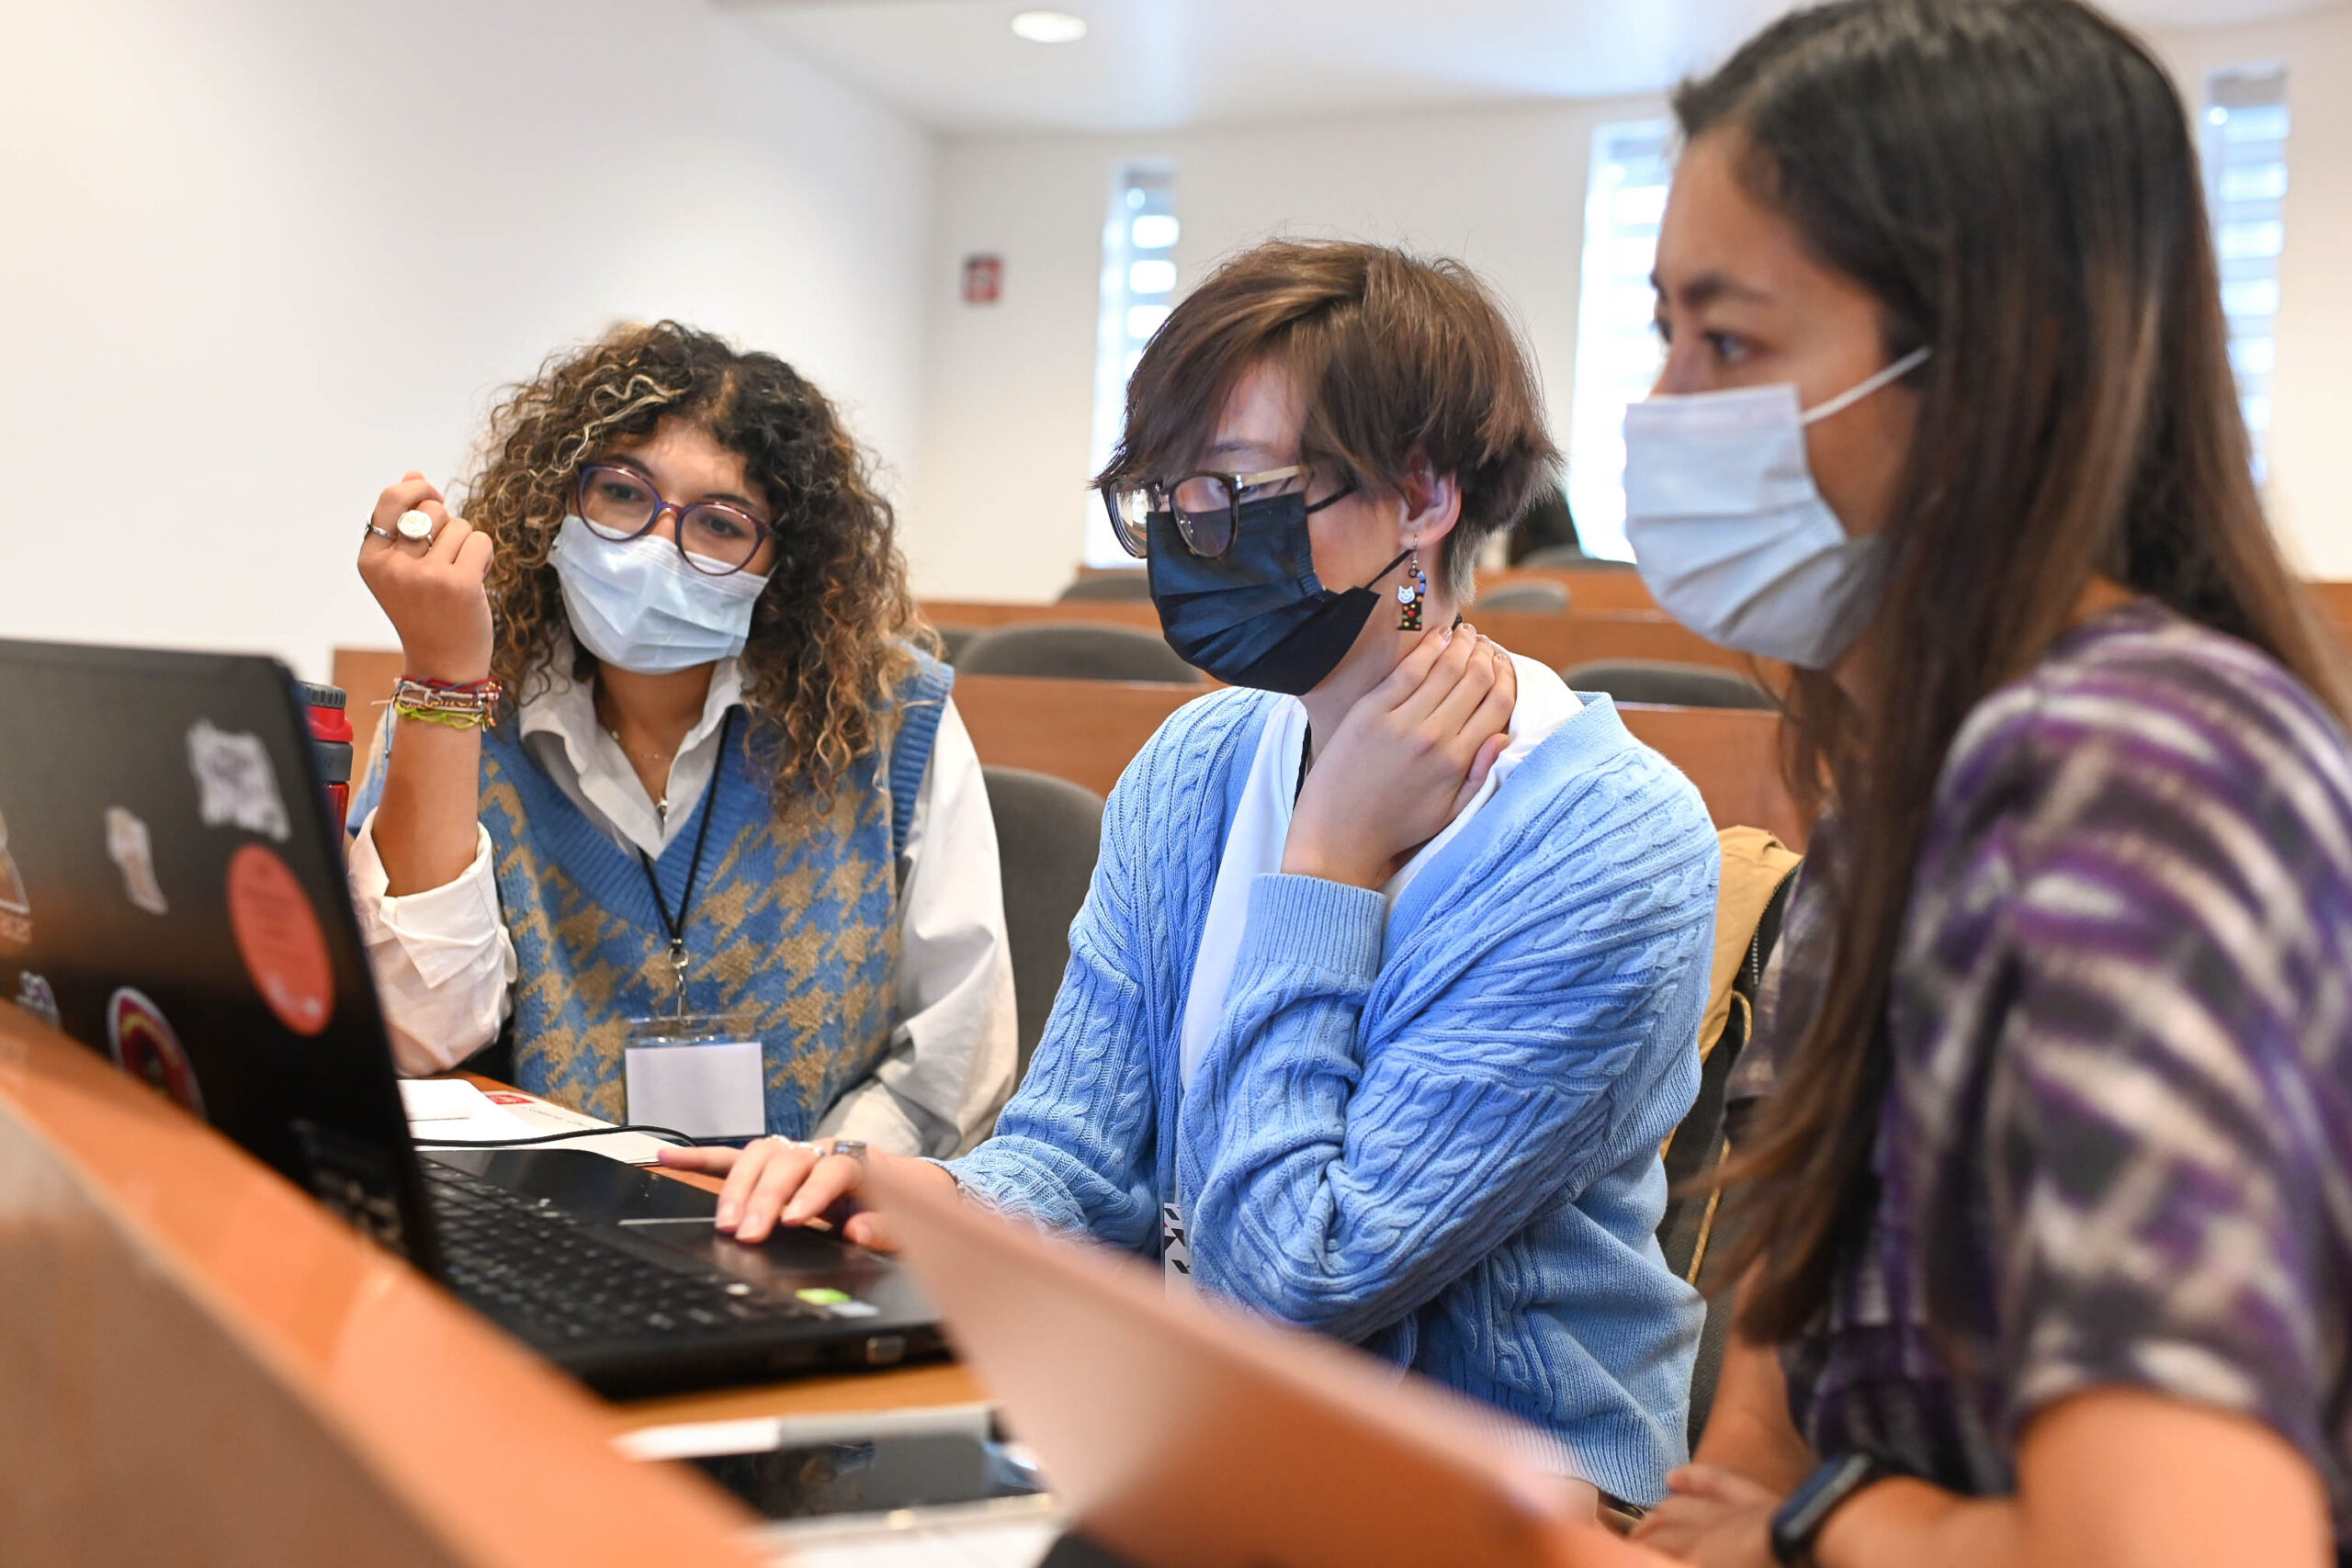 Three masked individuals work on a single computer.